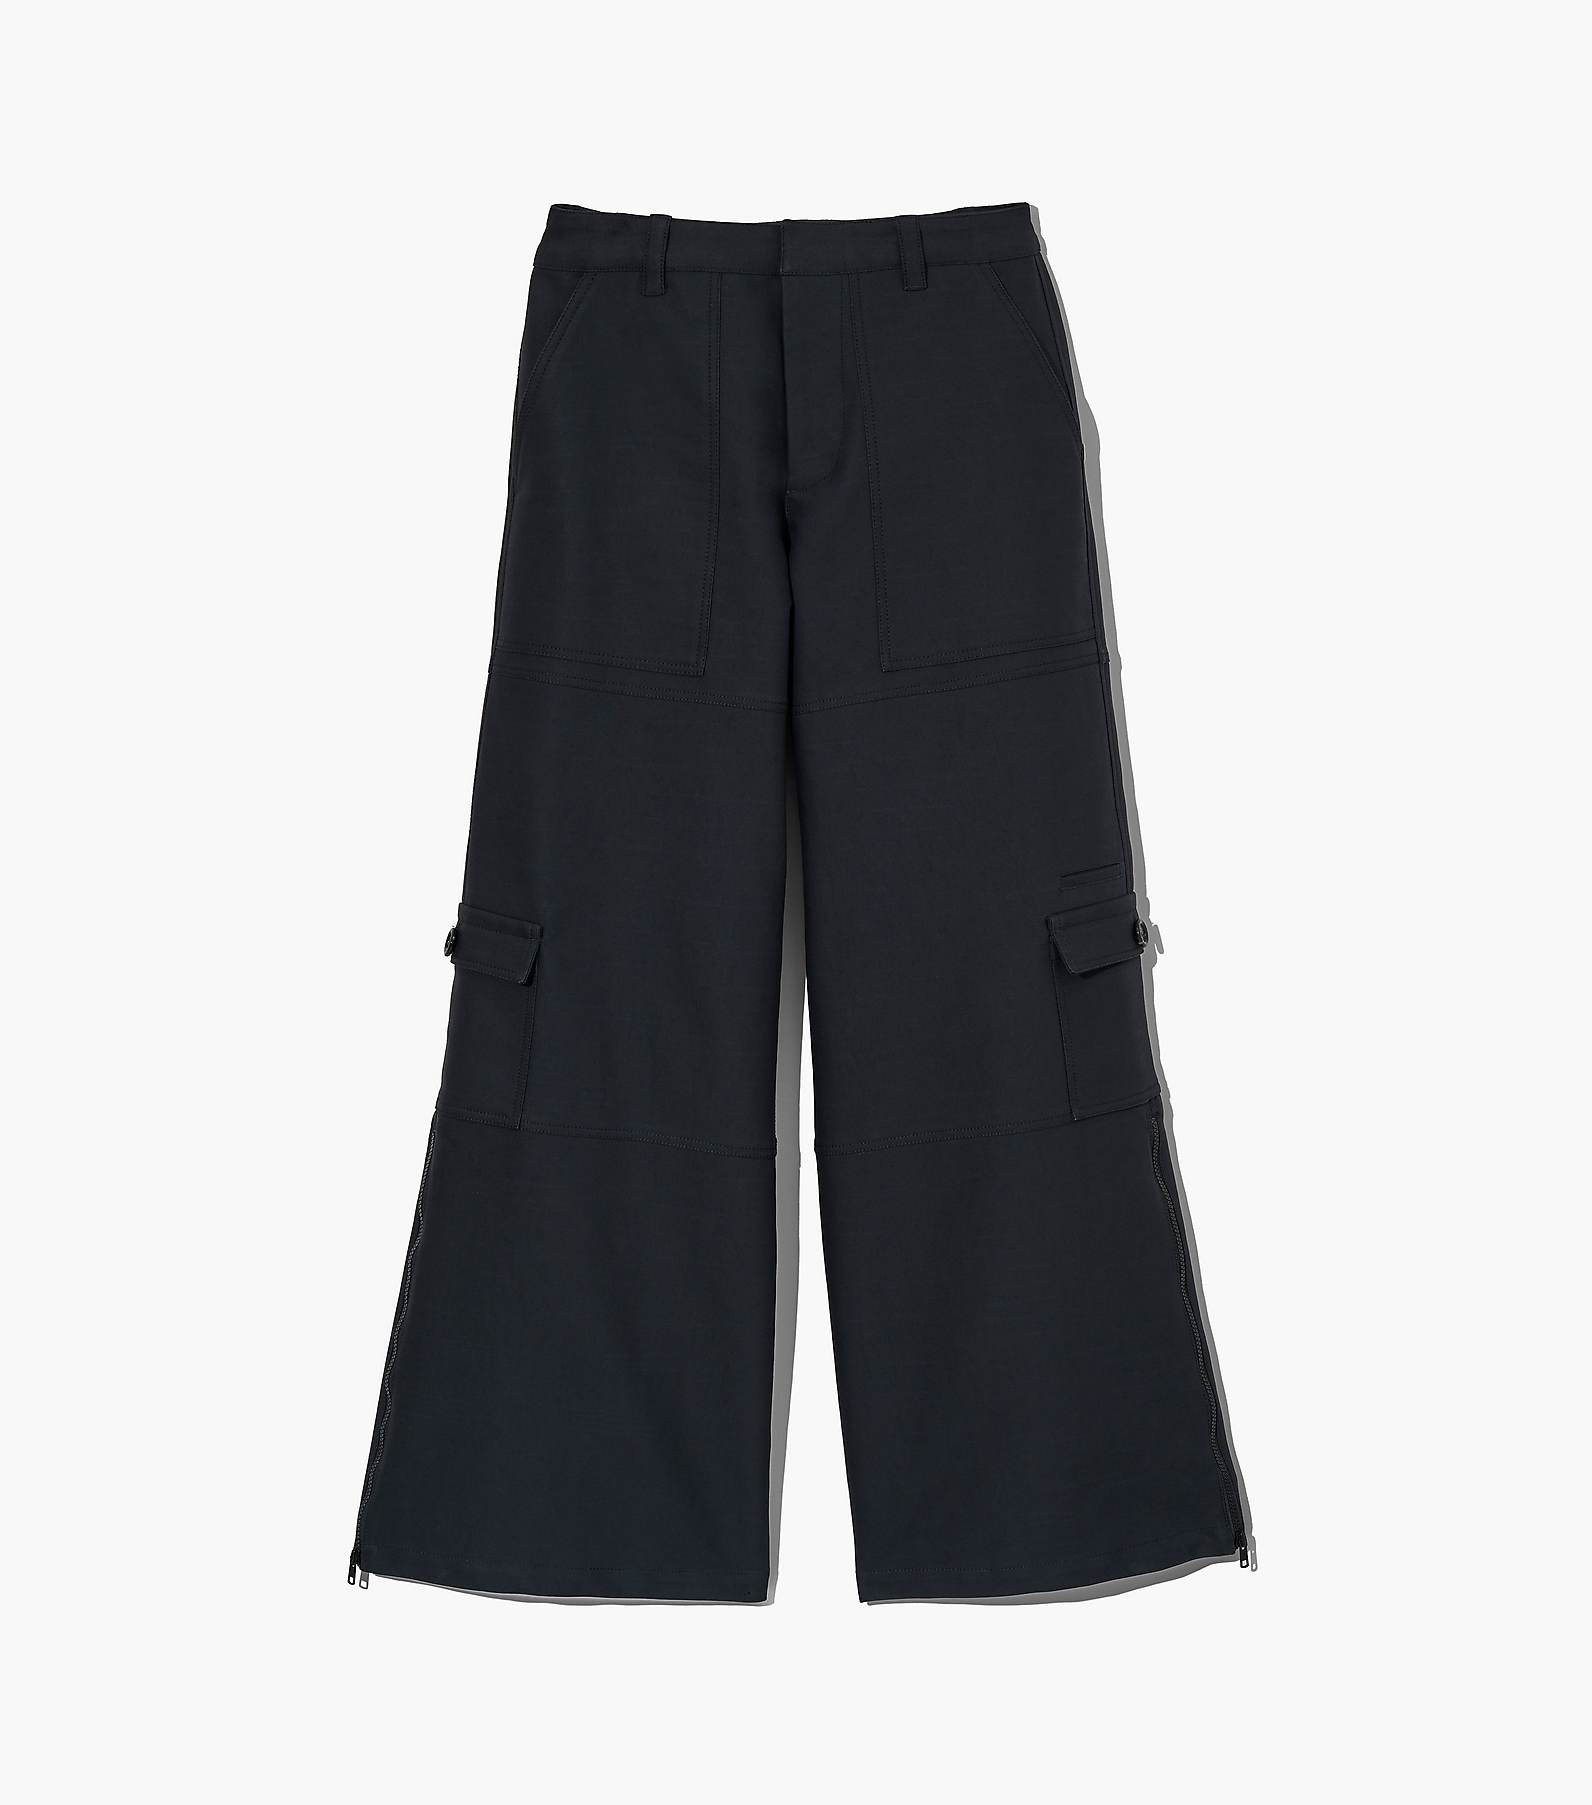 The Wide Leg Cargo Pant